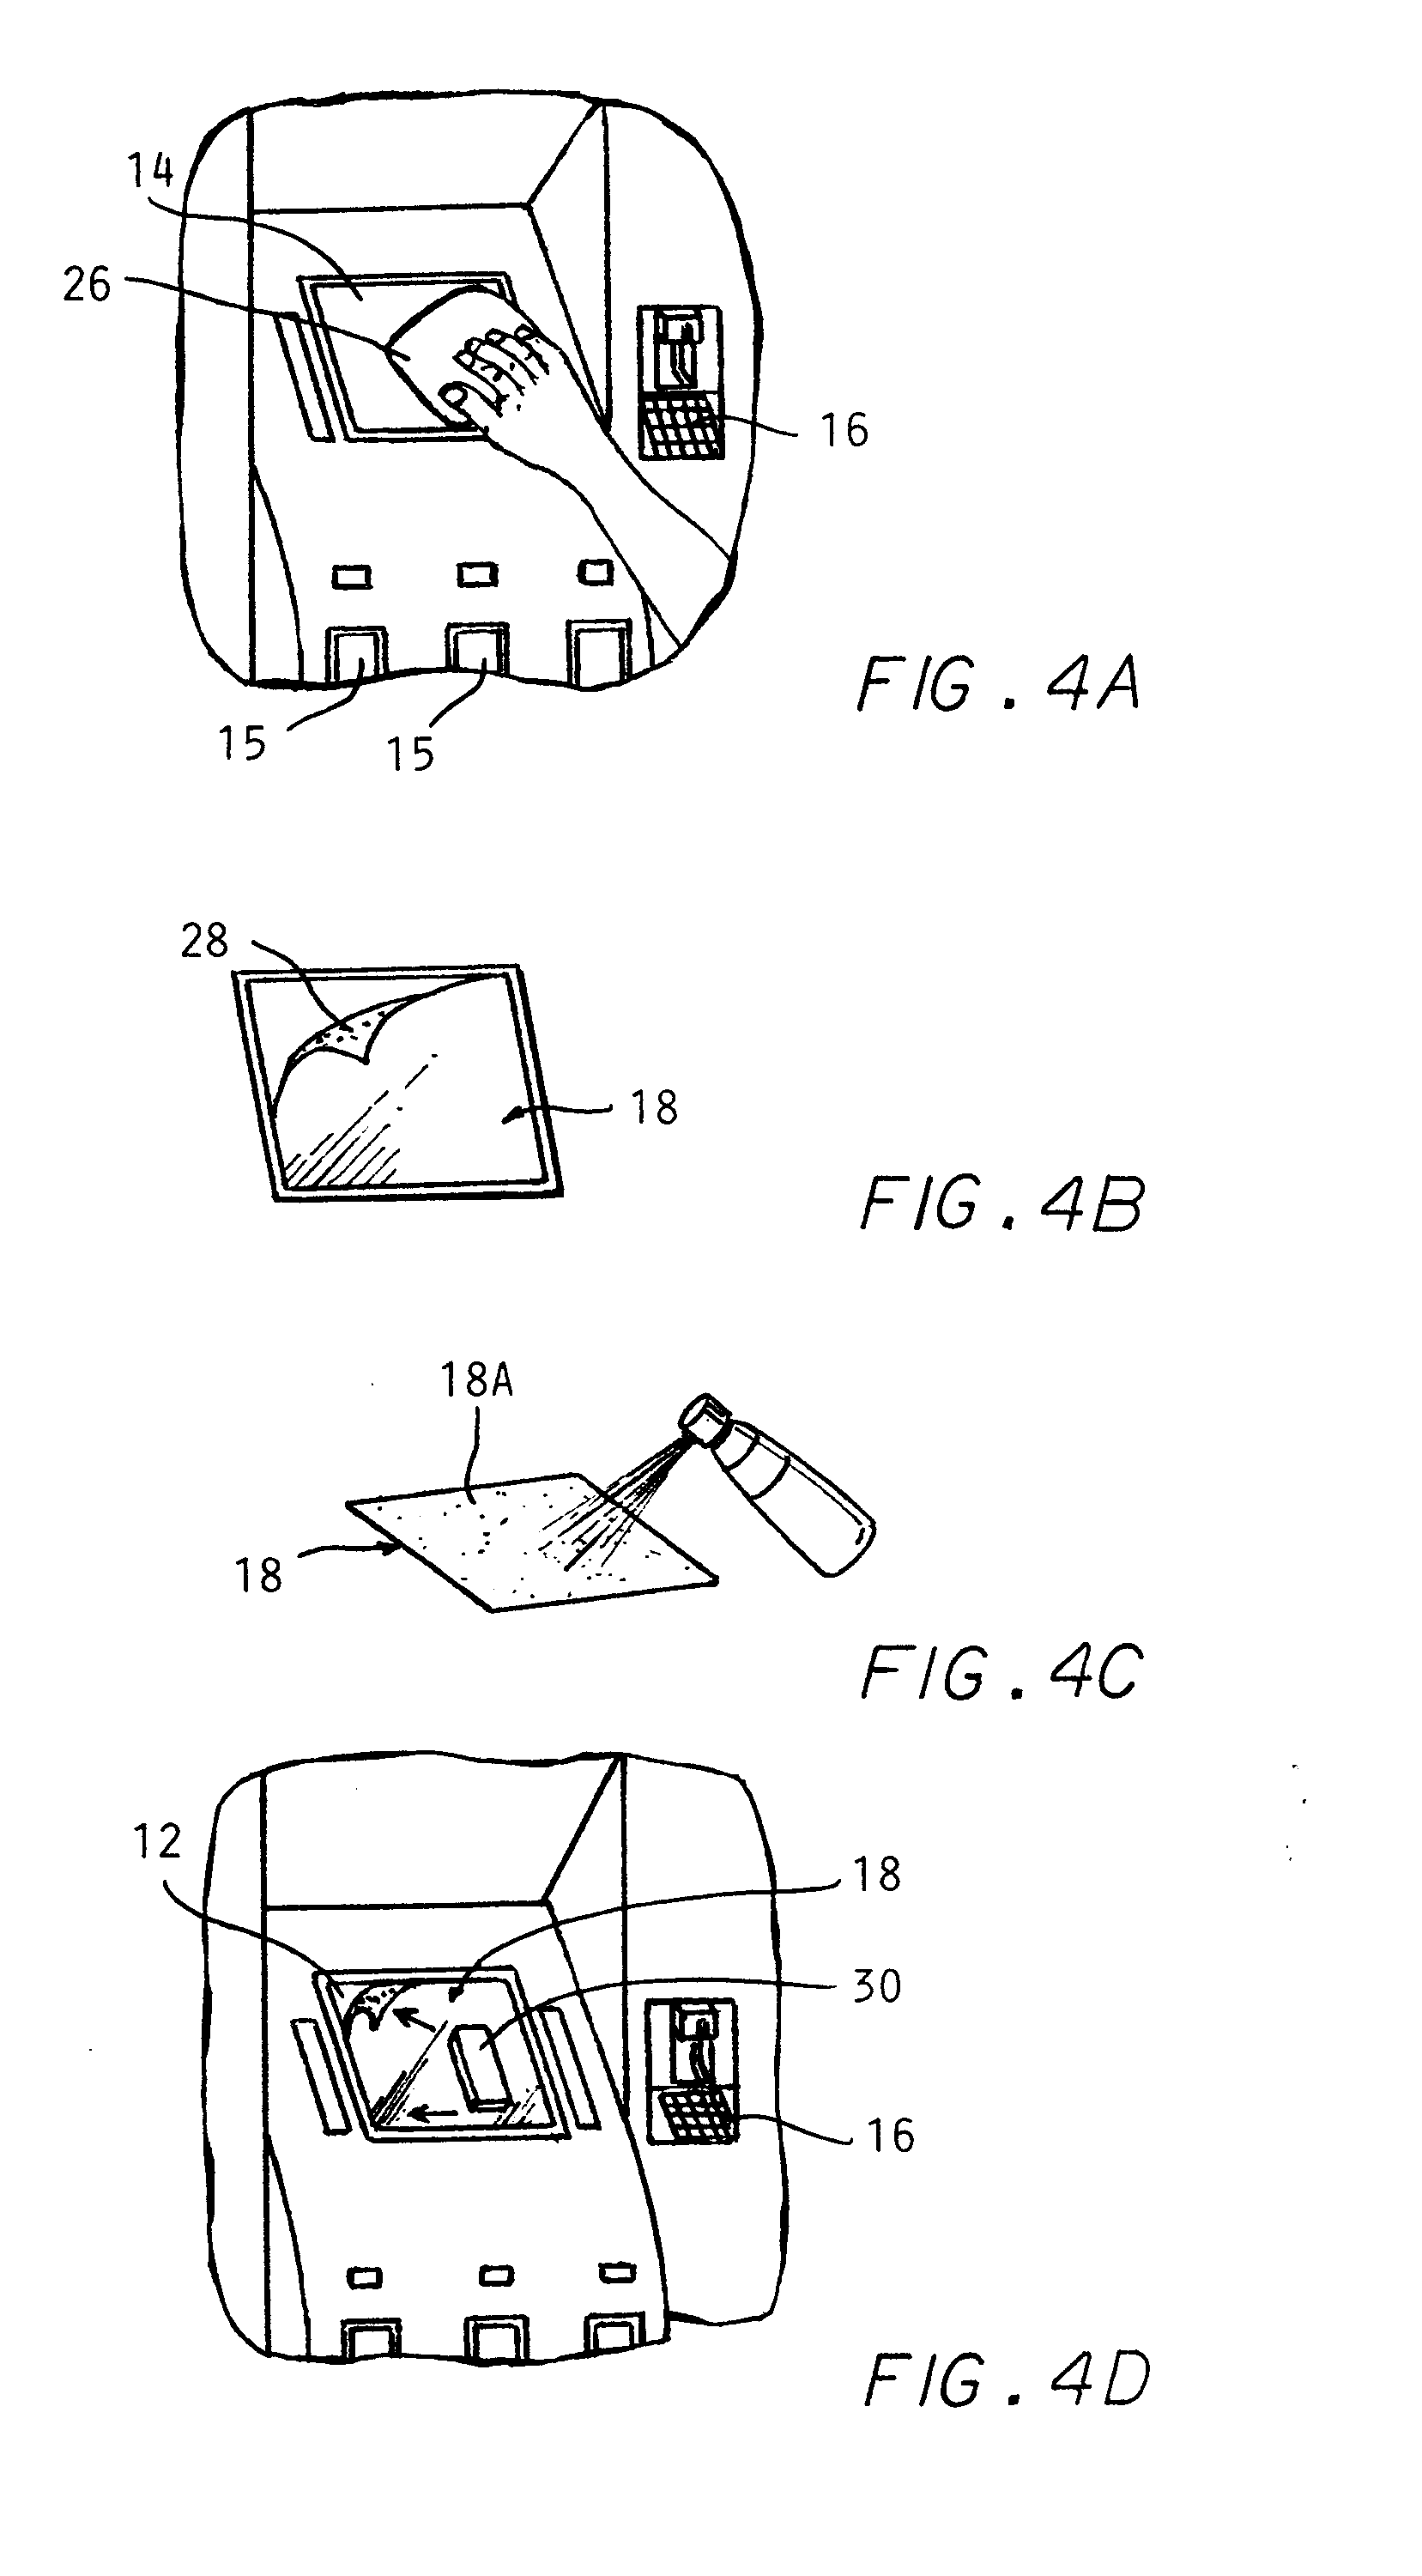 Method for protecting outdoor environment display screens and membrane keypads